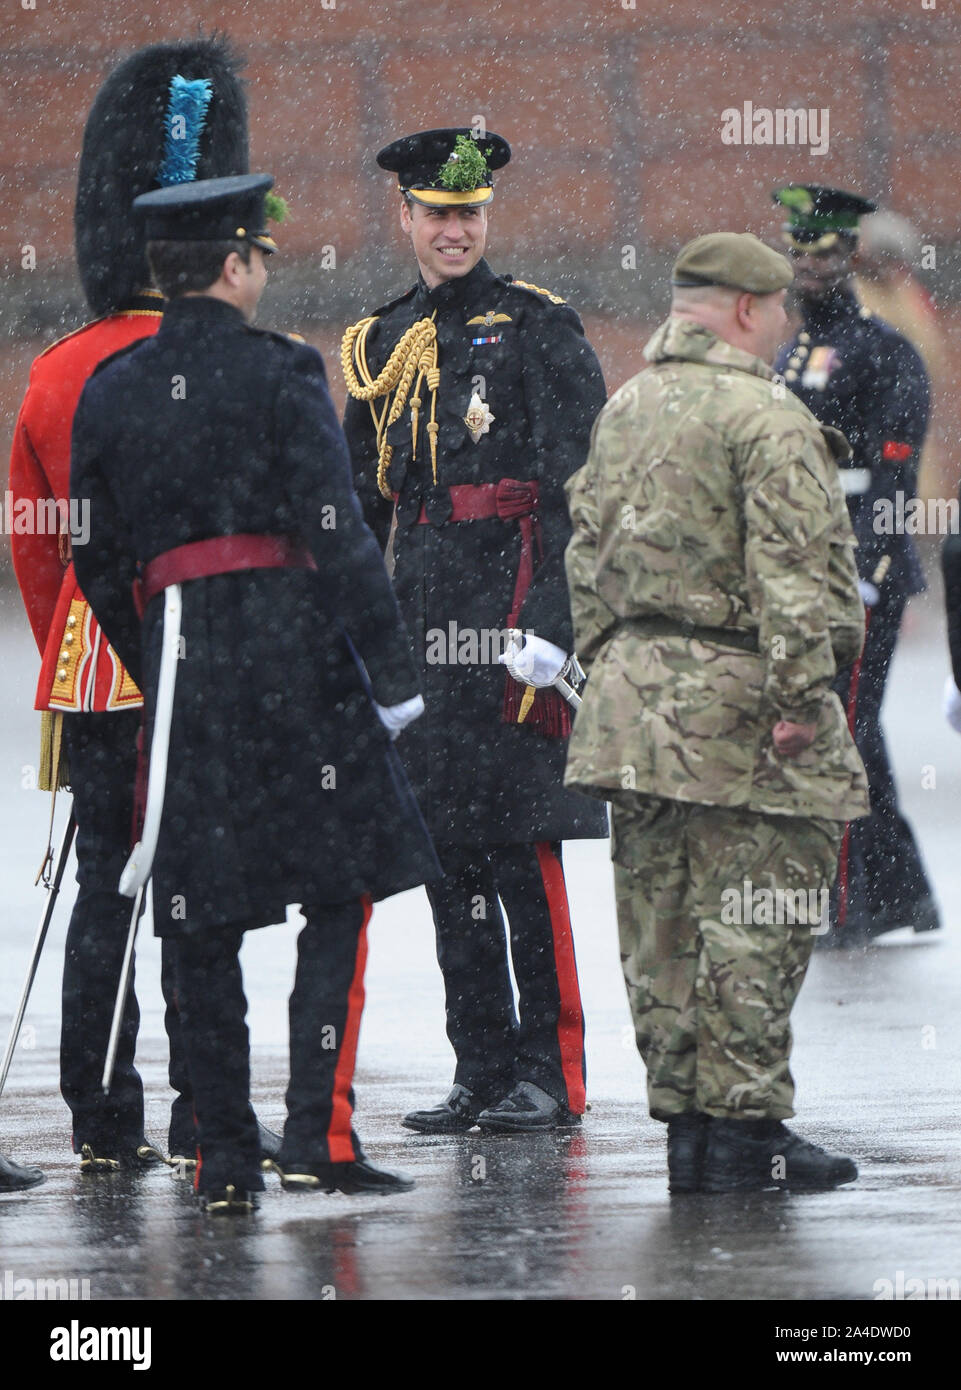 Photo Must Be Credited ©Kate Green/Alpha Press 077017 17/03/2013 Prince William Duke of Cambridge at the St Patricks Day Parade held at Mons Barracks in Aldershot, Hampshire Stock Photo